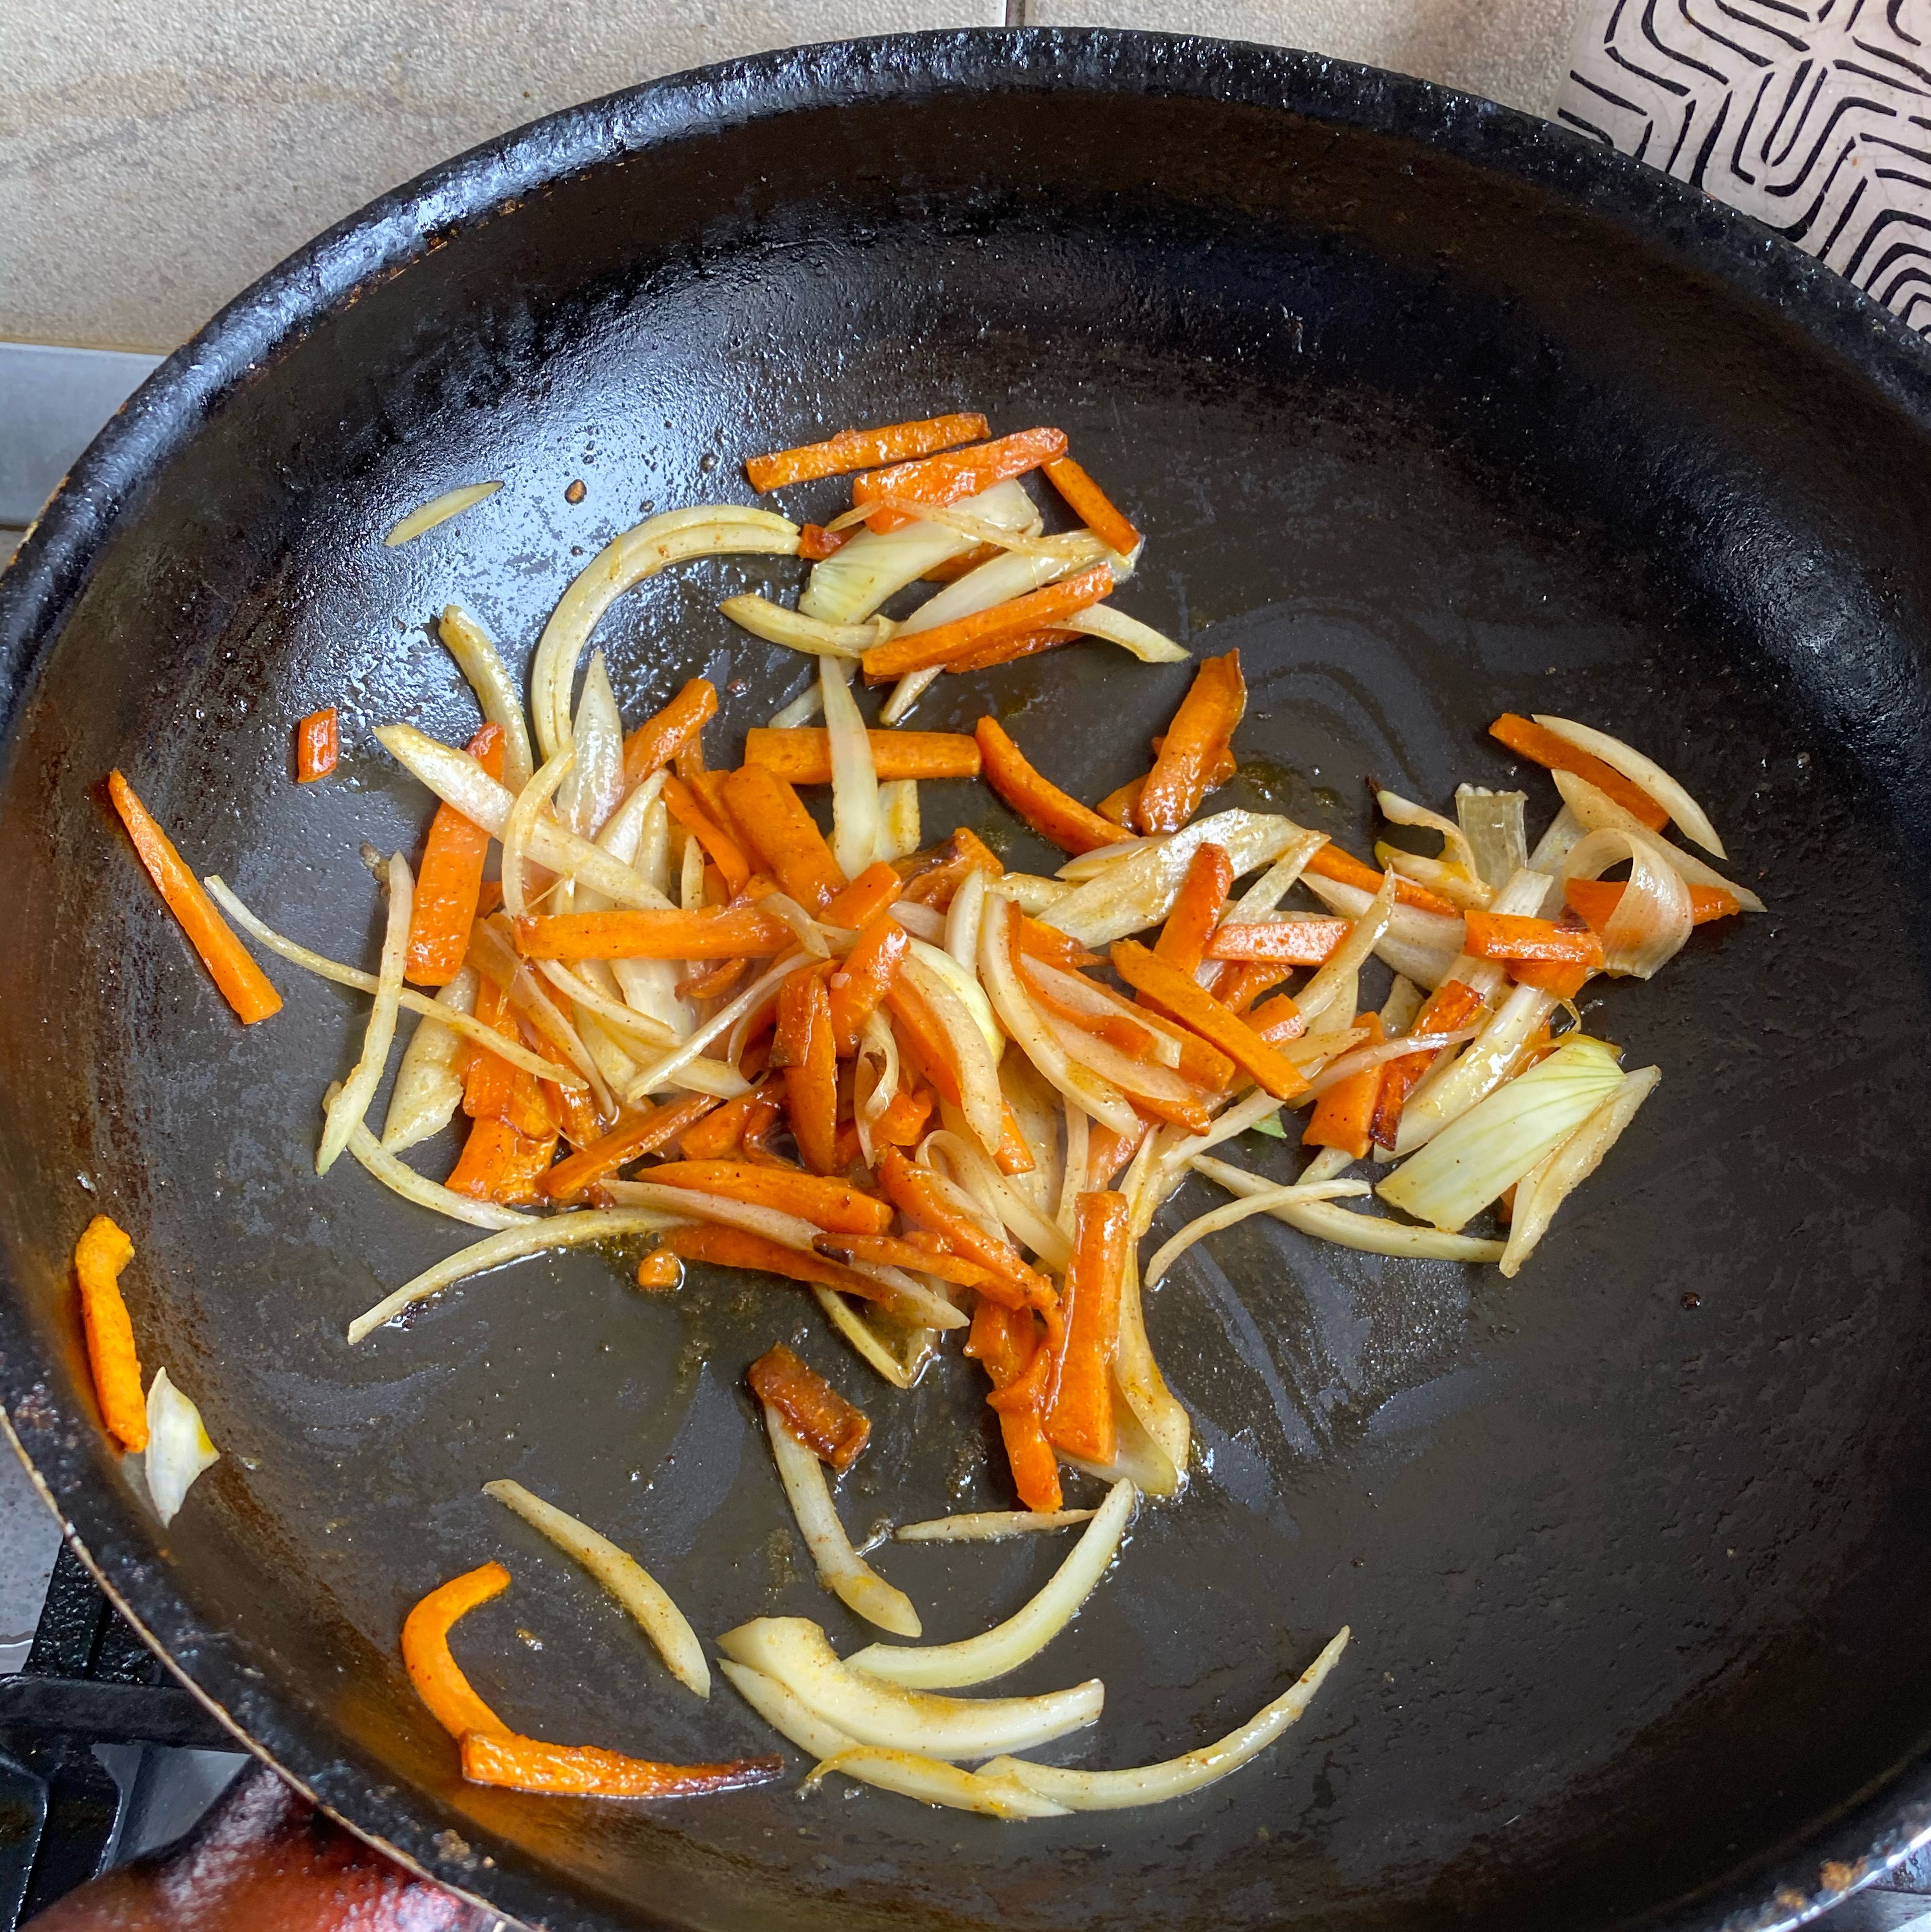 Soté your carrots coating them with some brown sugar and chilli powder. Add the onion and garlic. Stir for 3 minutes until softened. In the meantime, cook the dry udon noodles in boiling water with salt for 10 min.